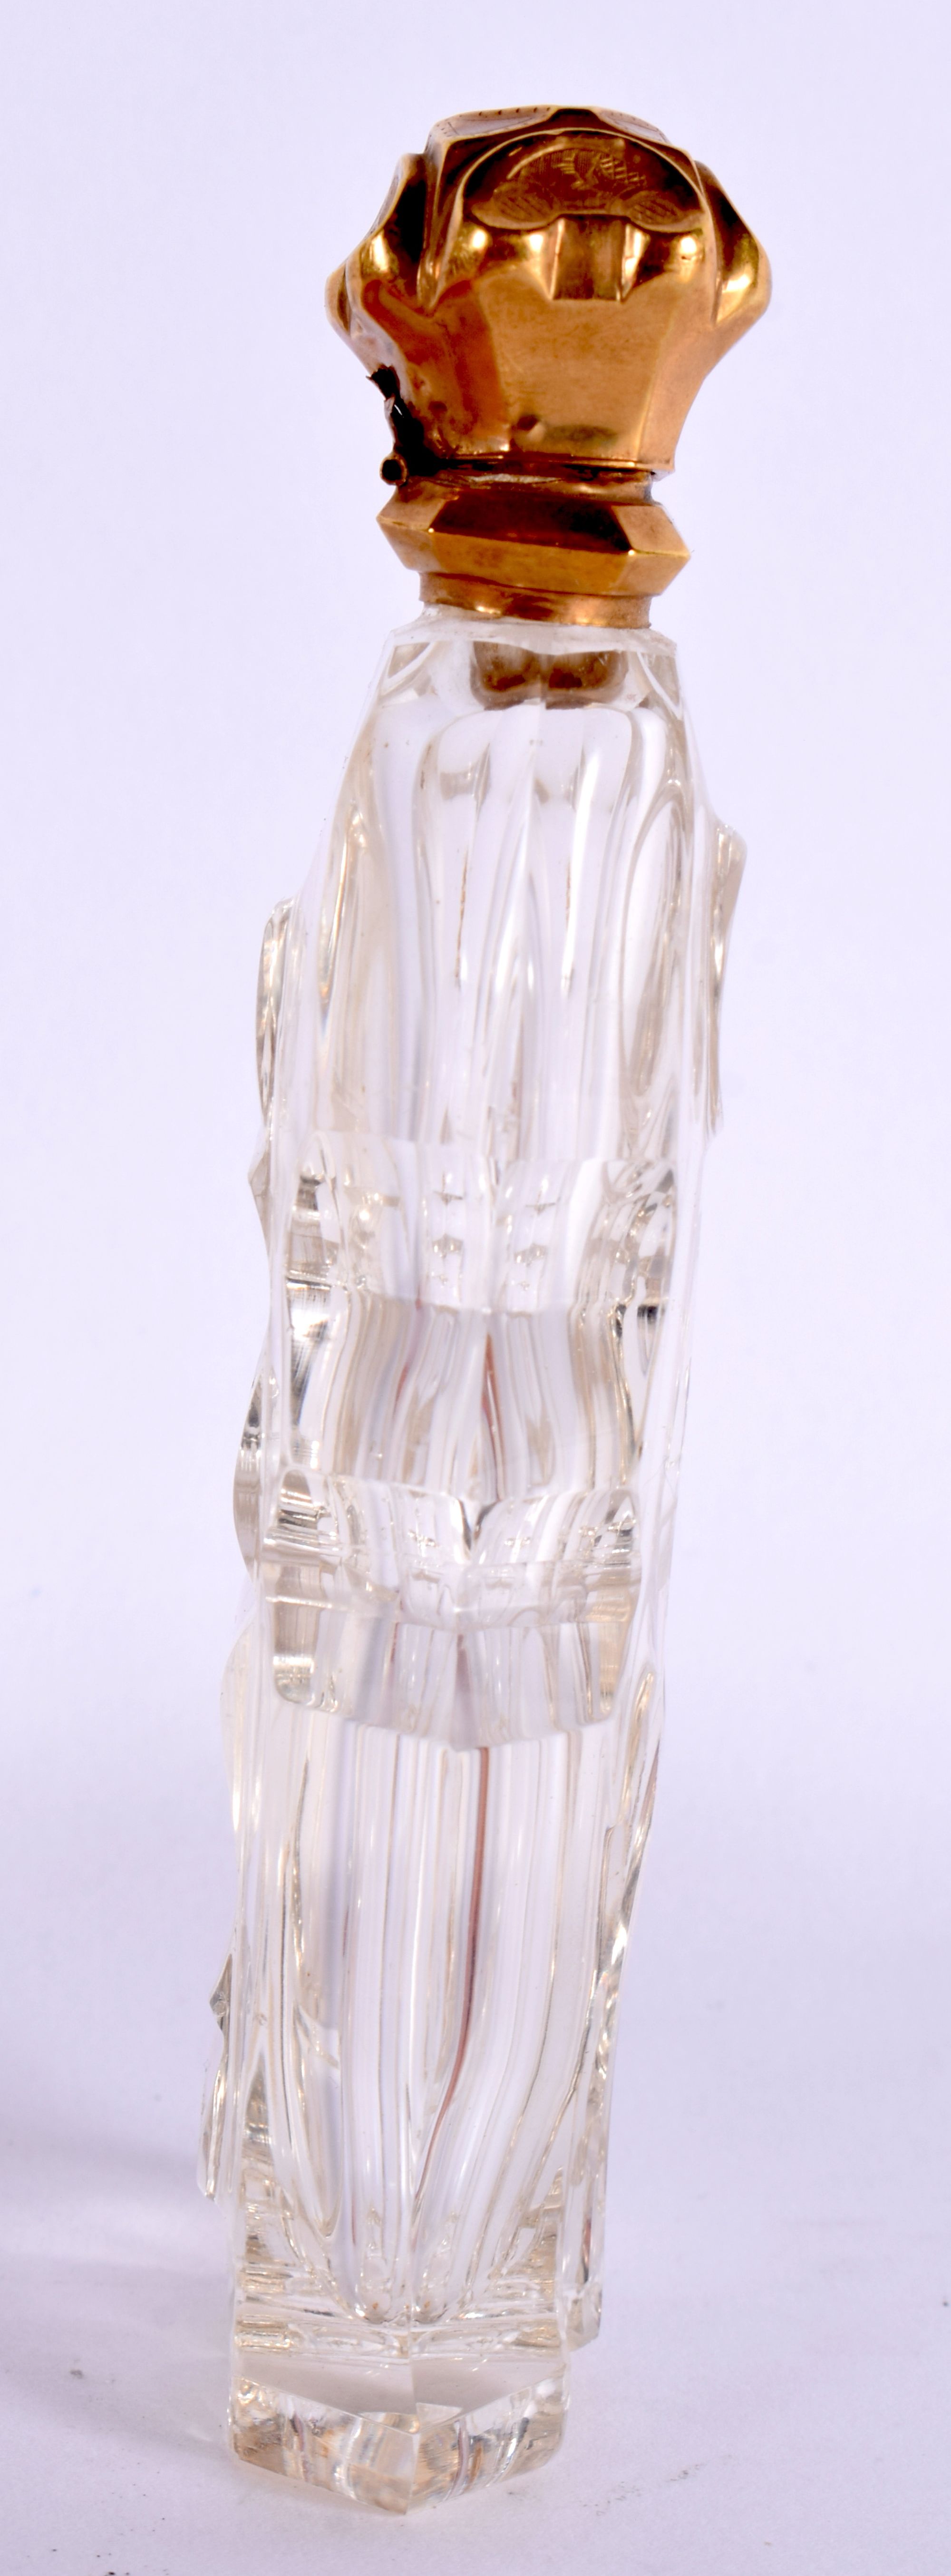 AN ANTIQUE GOLD CRYSTAL GLASS SCENT BOTTLE. 11.5 cm high. - Image 2 of 5